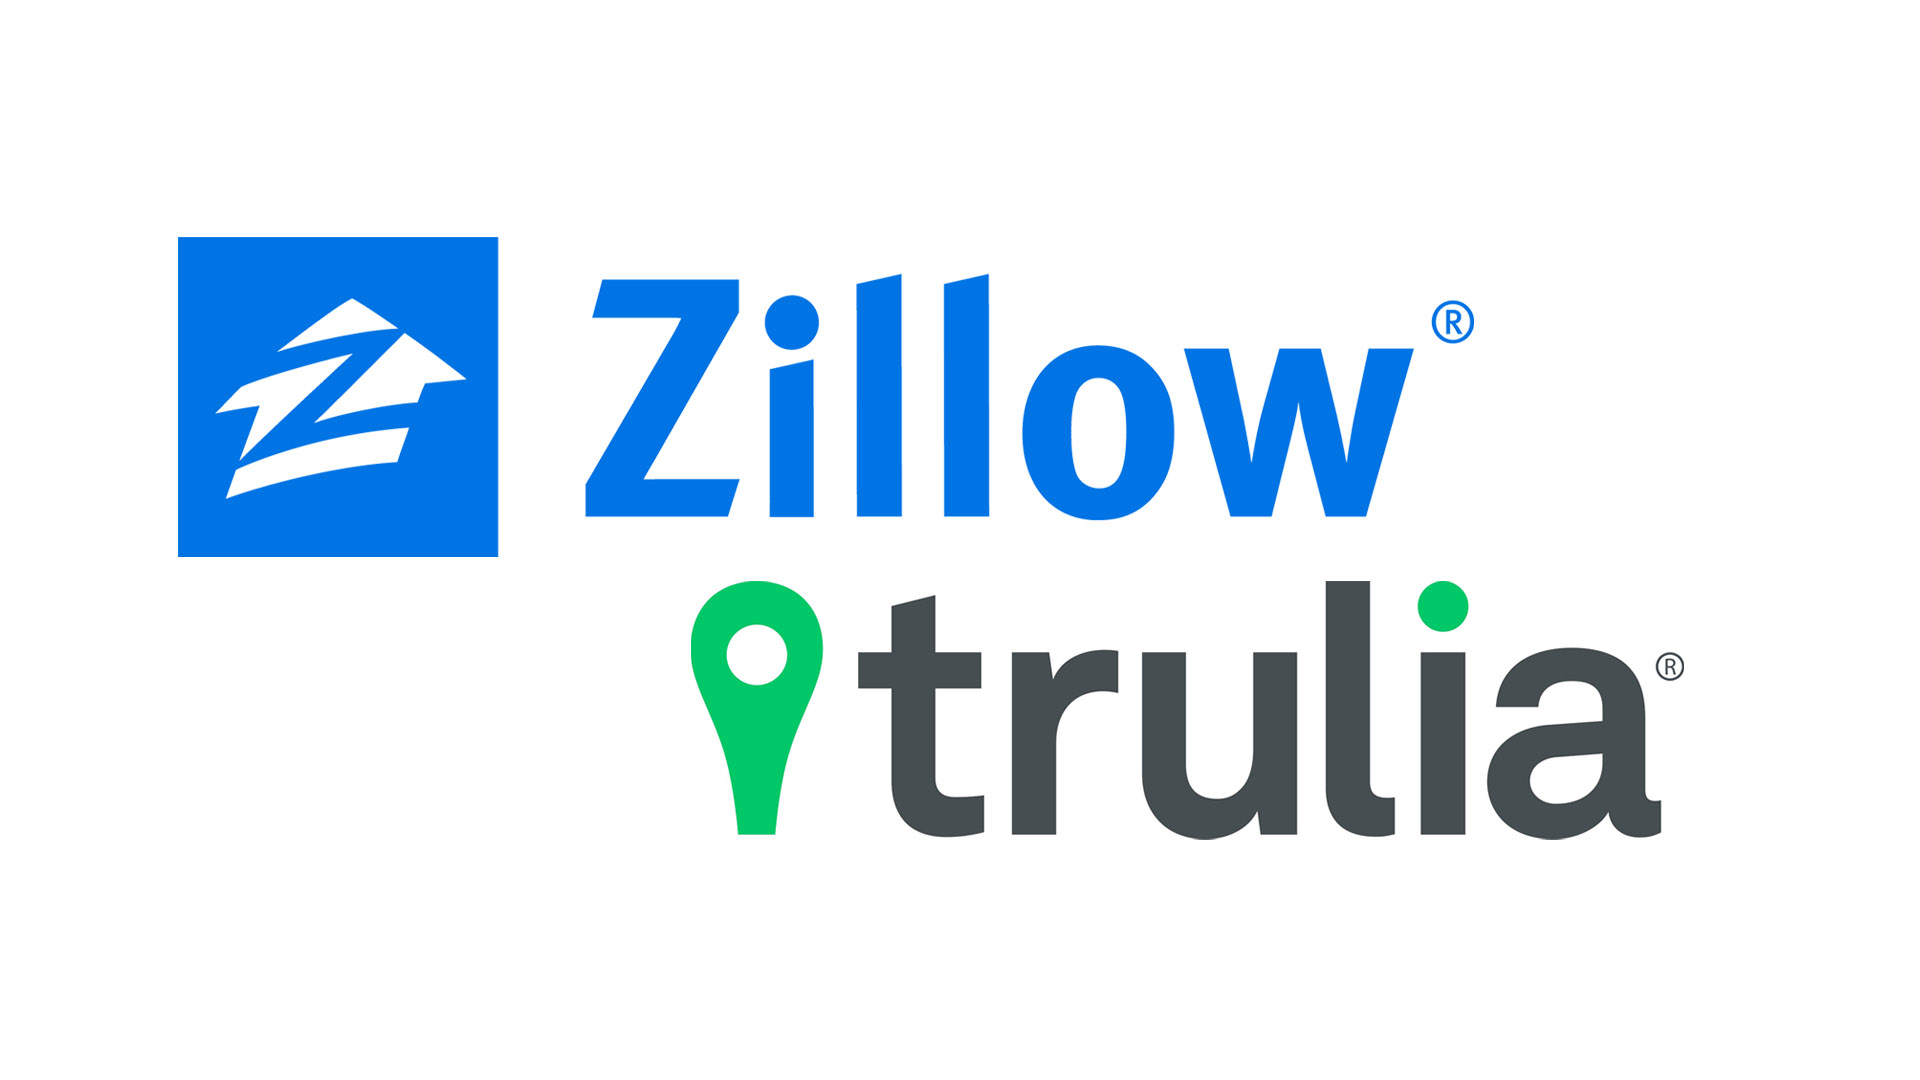 Zillow and Trulia logos